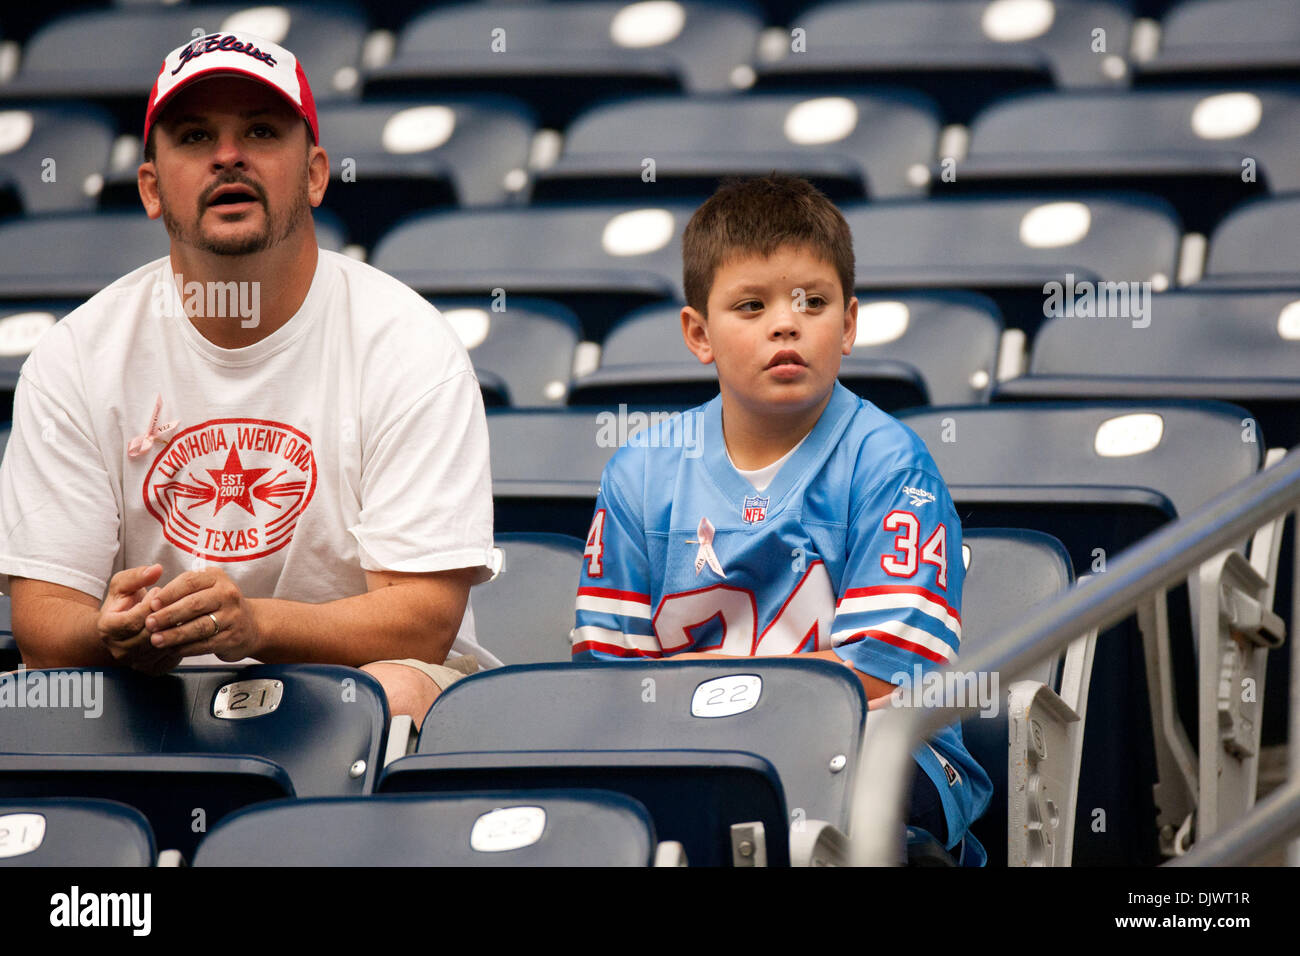 Oct. 10, 2010 - Houston, Texas, U.S - Young Houston Oilers fan at the game  with his retro Houston Oilers jersey to watch the game with NY Giants at Houston  Texans. NY